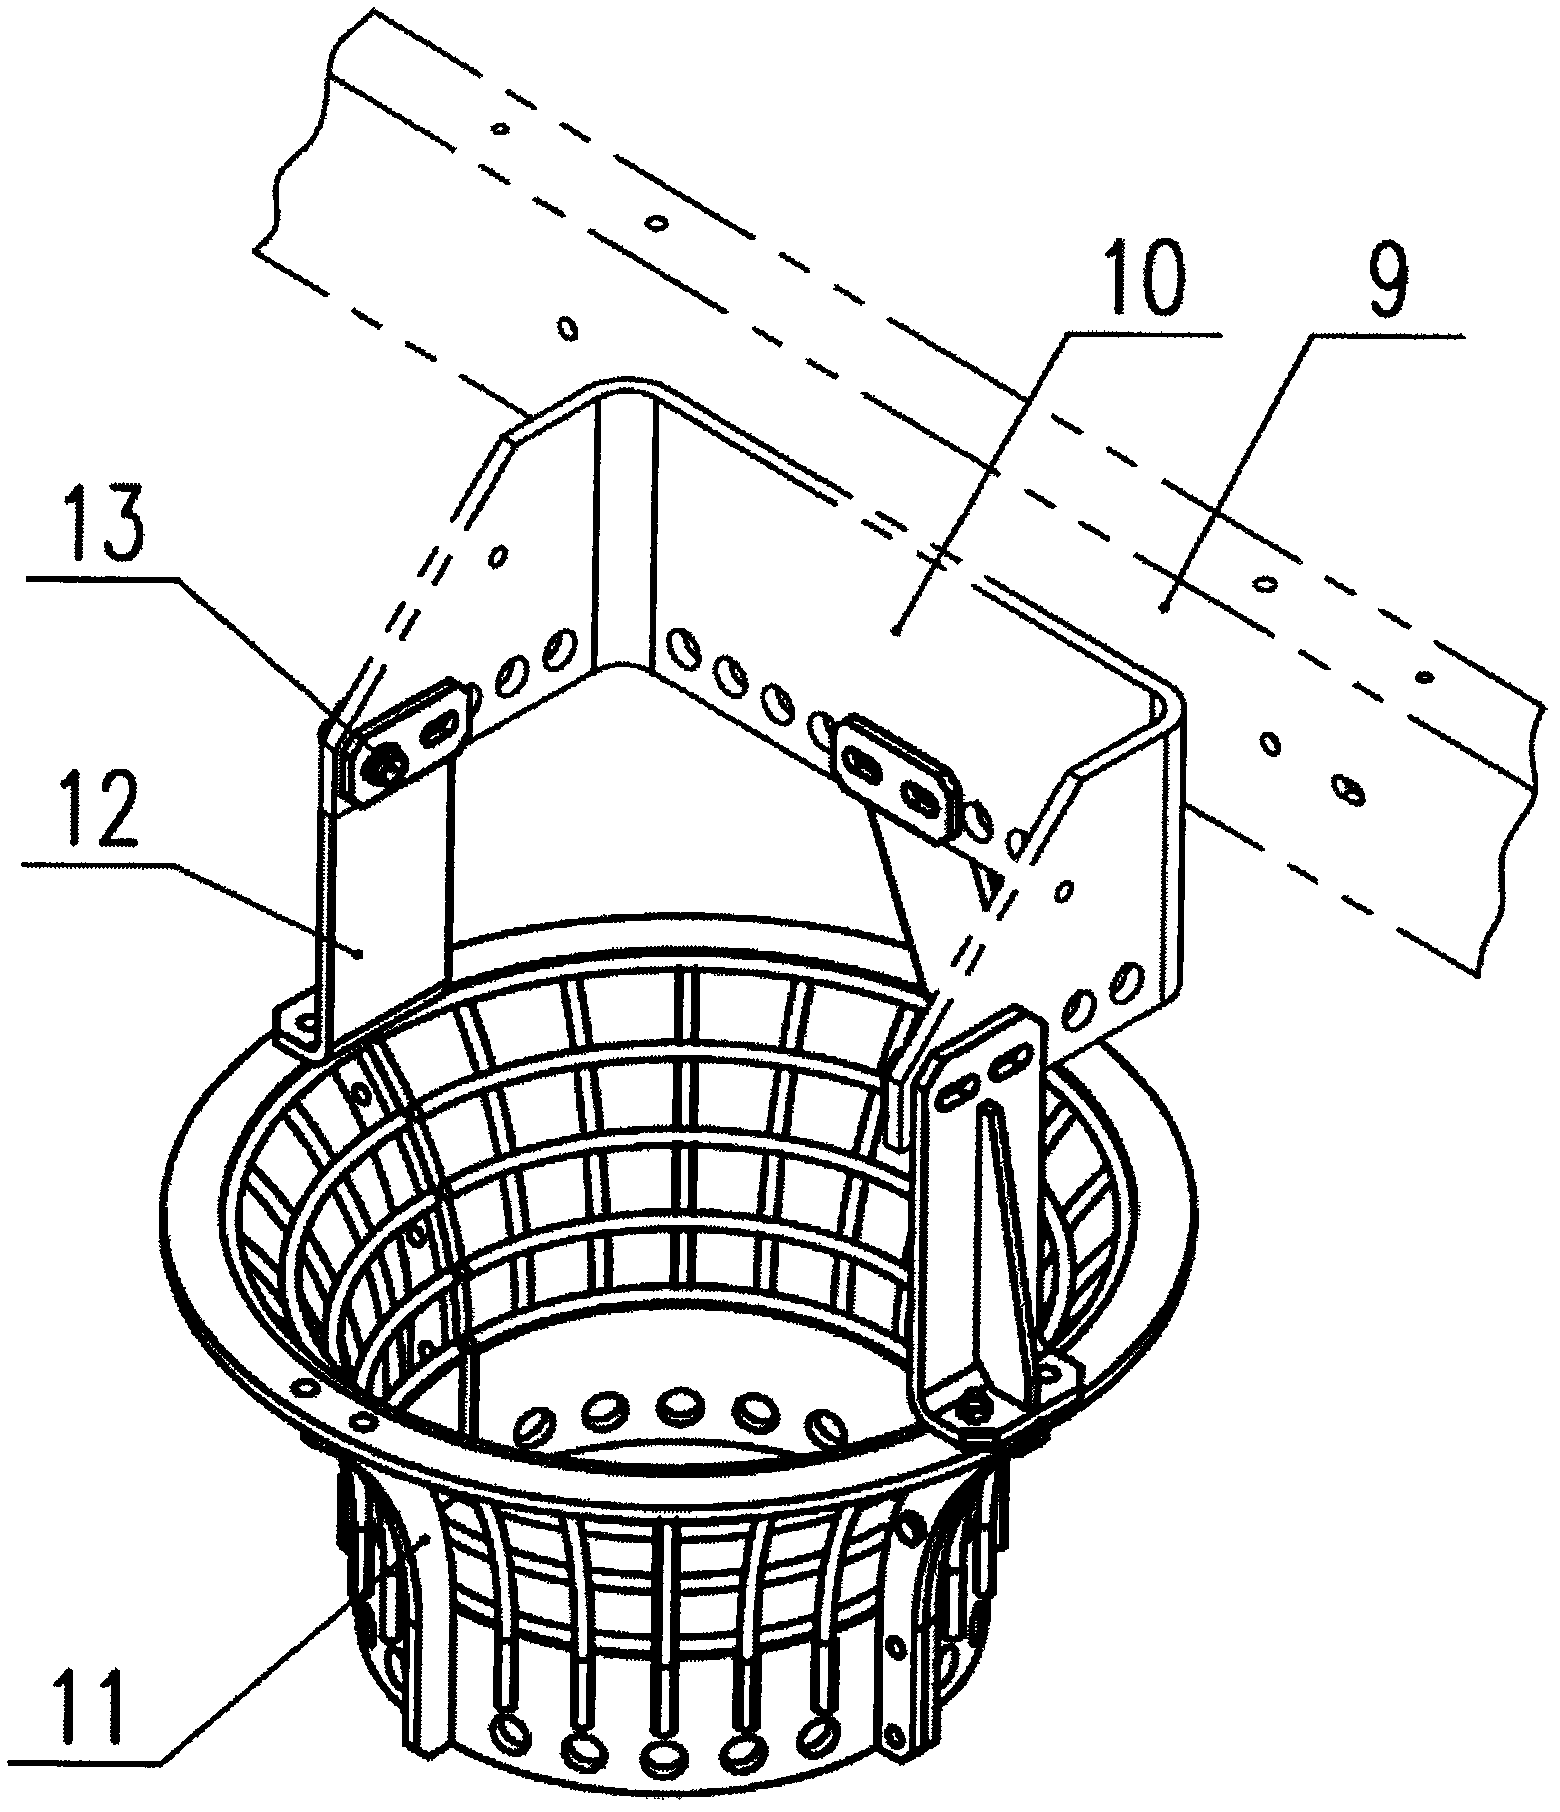 Power cable basket structure for large-sized wind generating set